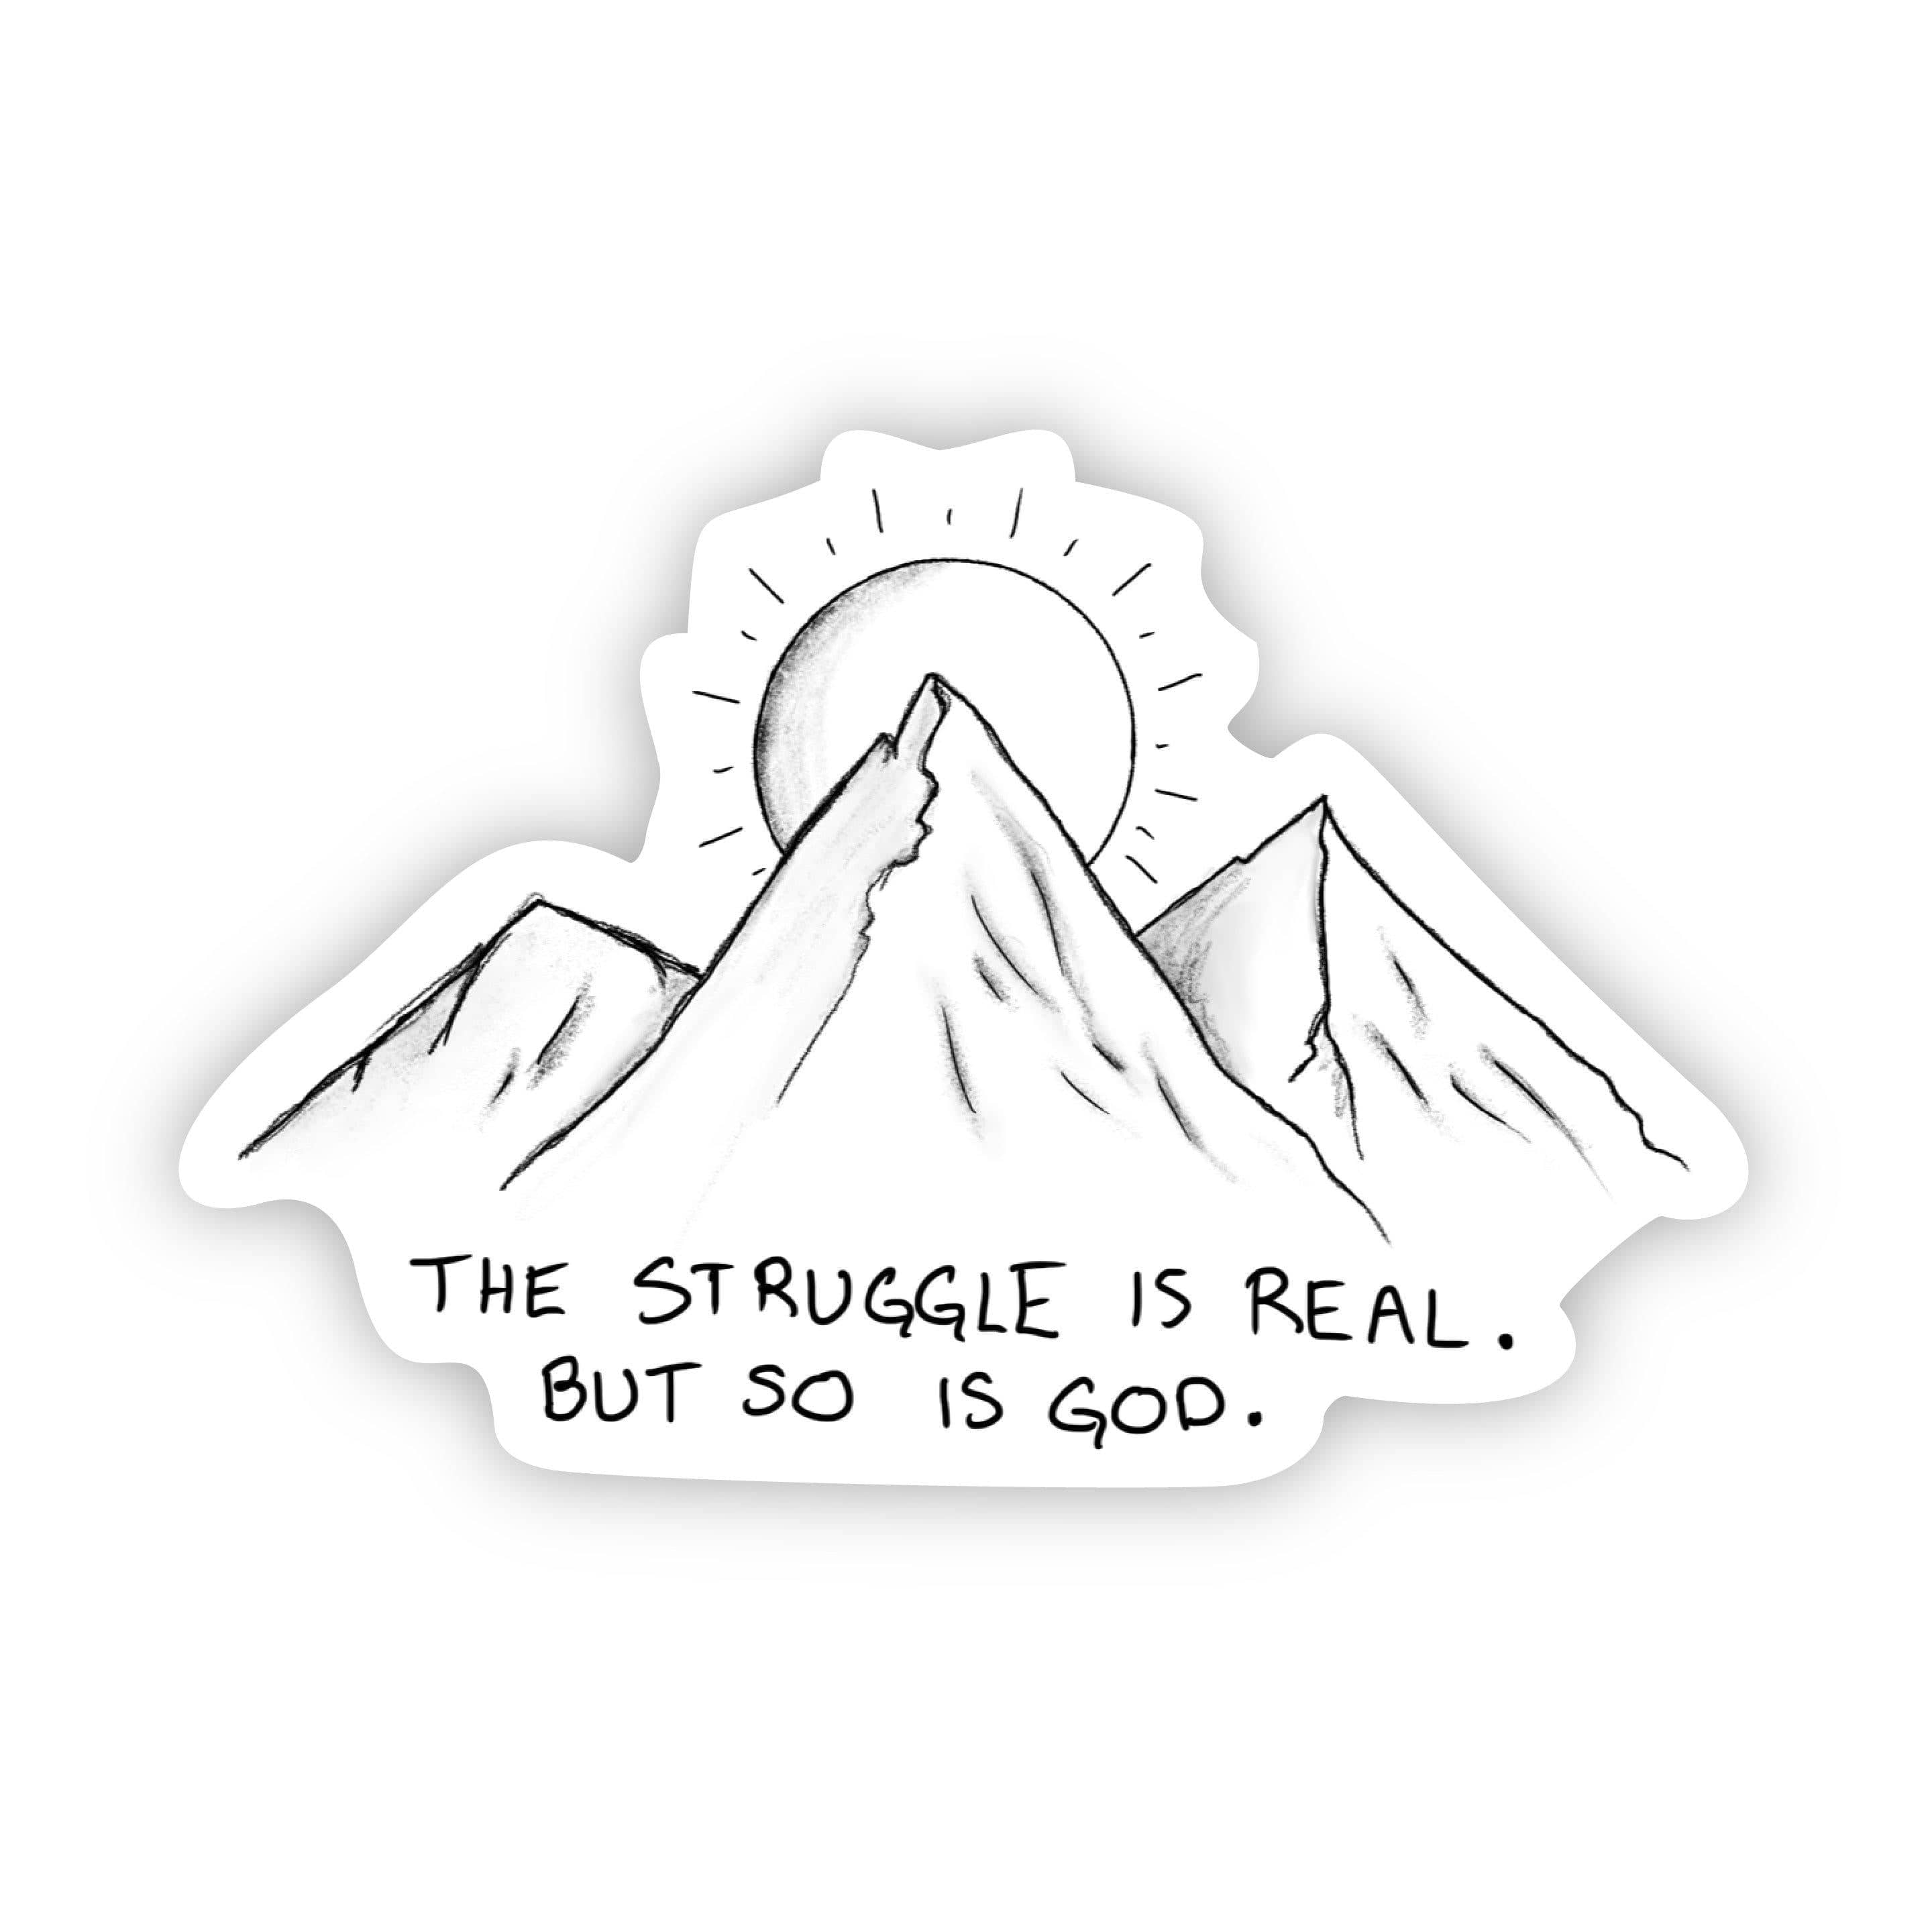 The Struggle is Real. But so is God - Faith Sticker Mountains